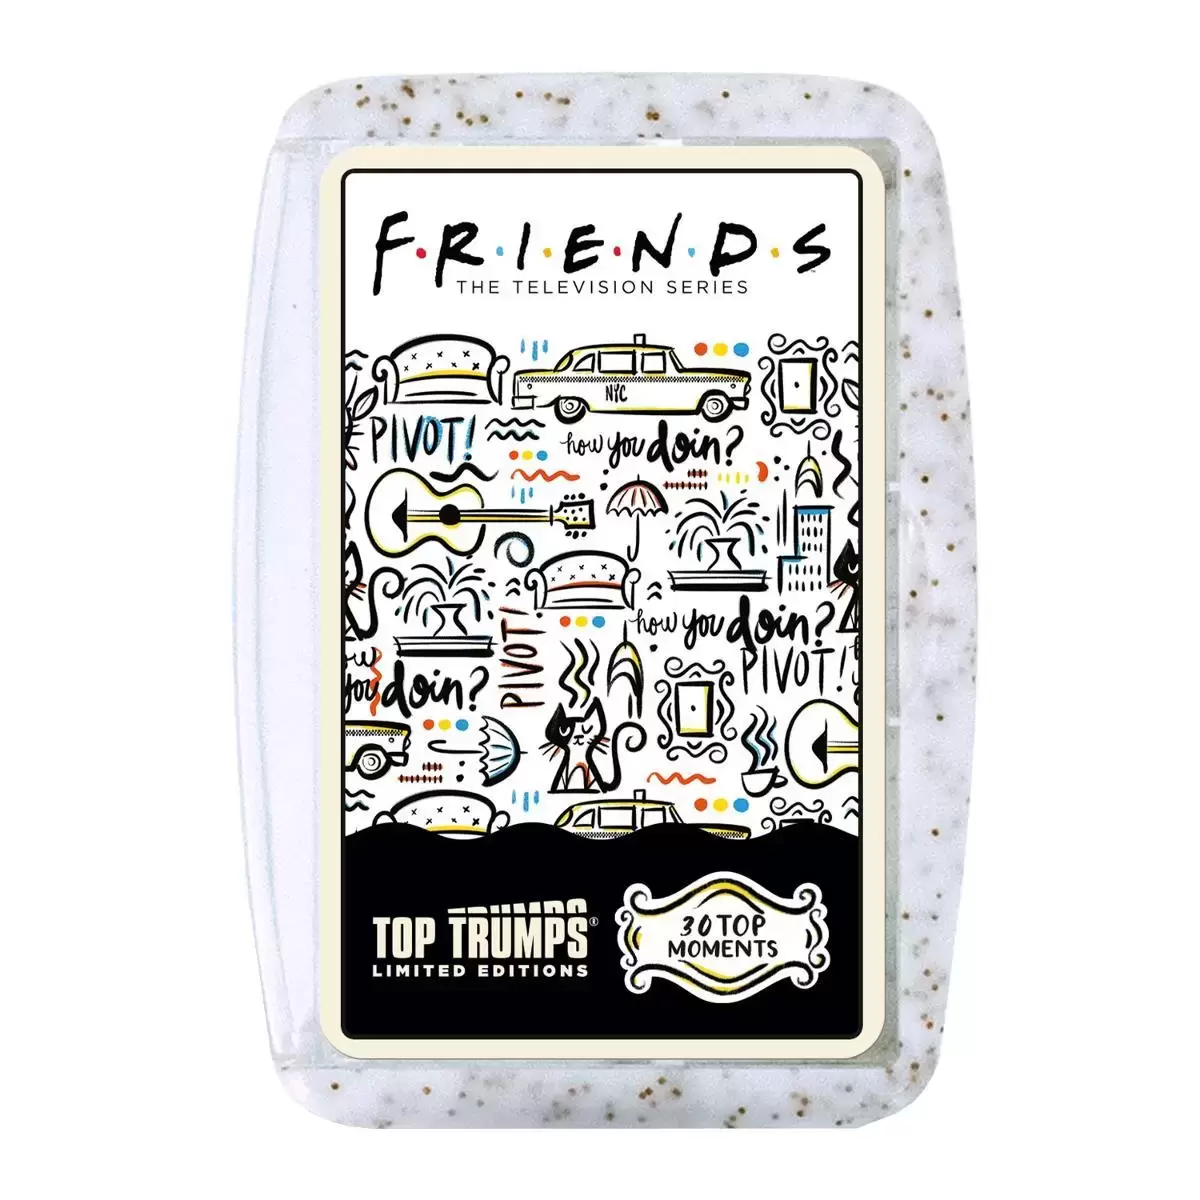 Top Trumps - Friends  Limited Edition